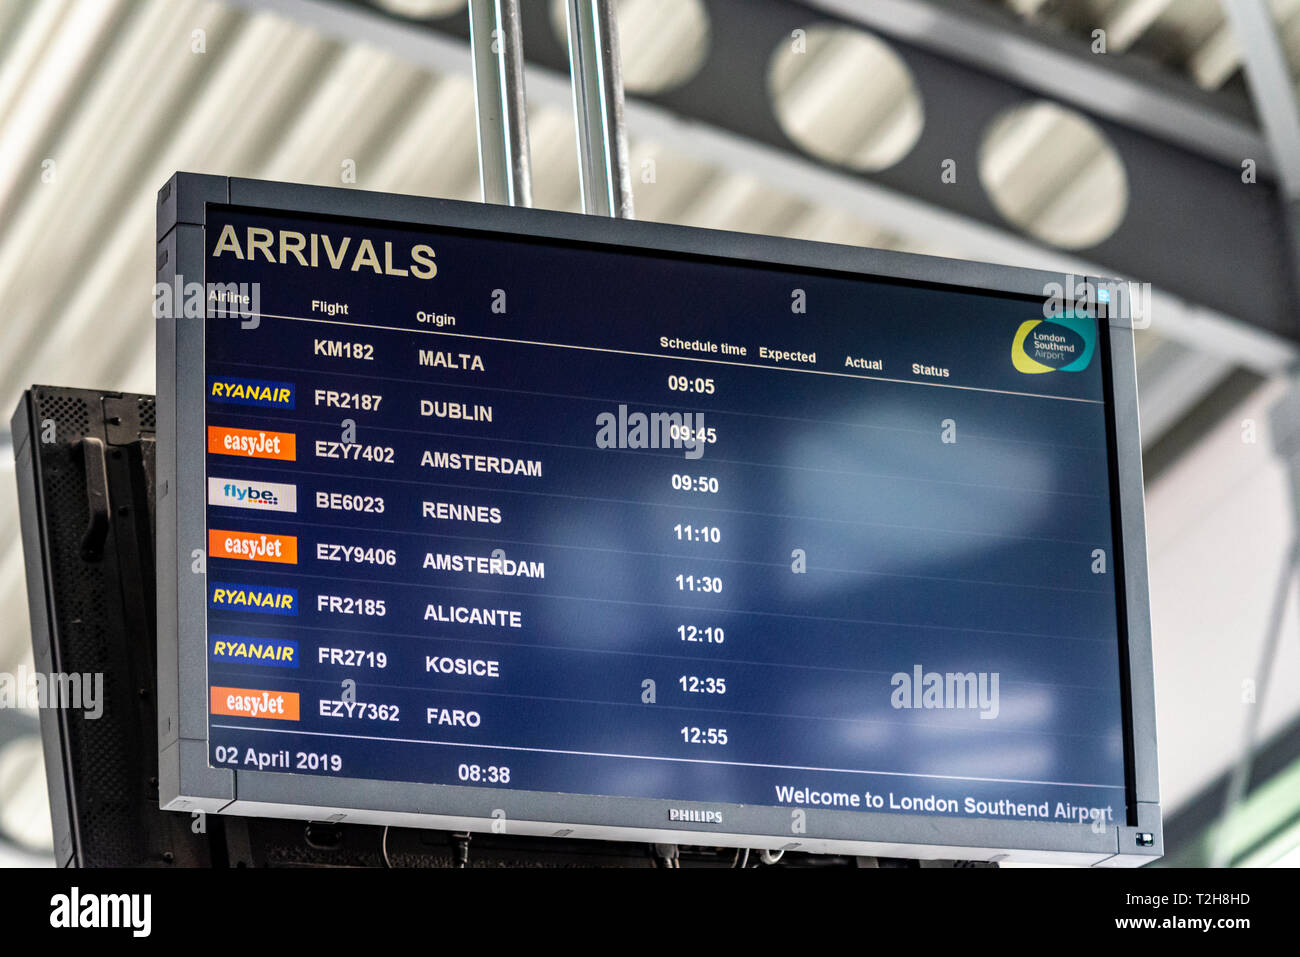 Ryanair have launched their first services from London Southend Airport with the Dublin flight FR2187 displayed on the arrivals board Stock Photo